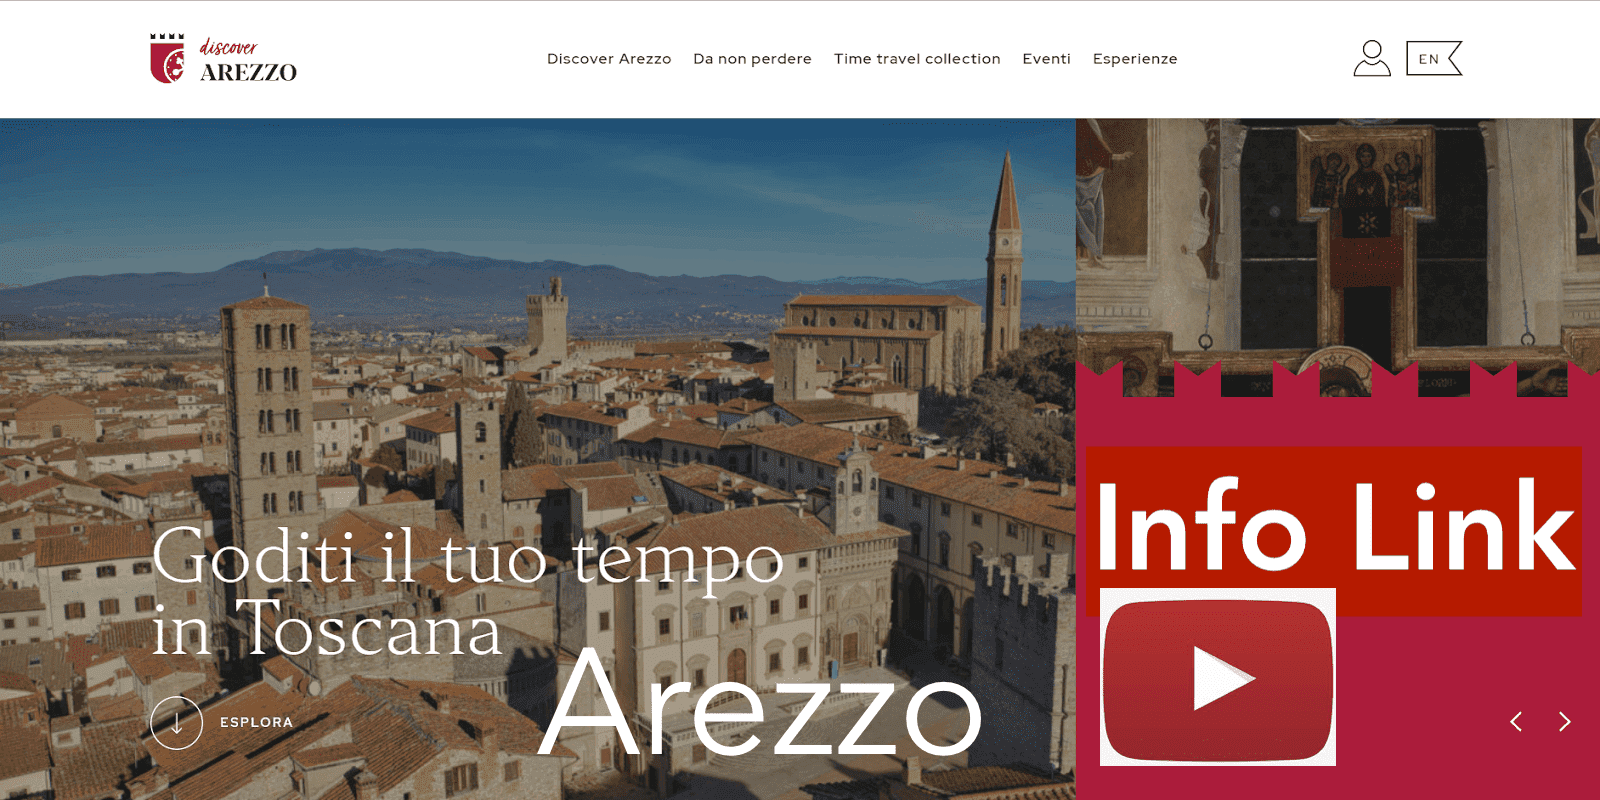 ENJOY YOUR TIME IN AREZZO